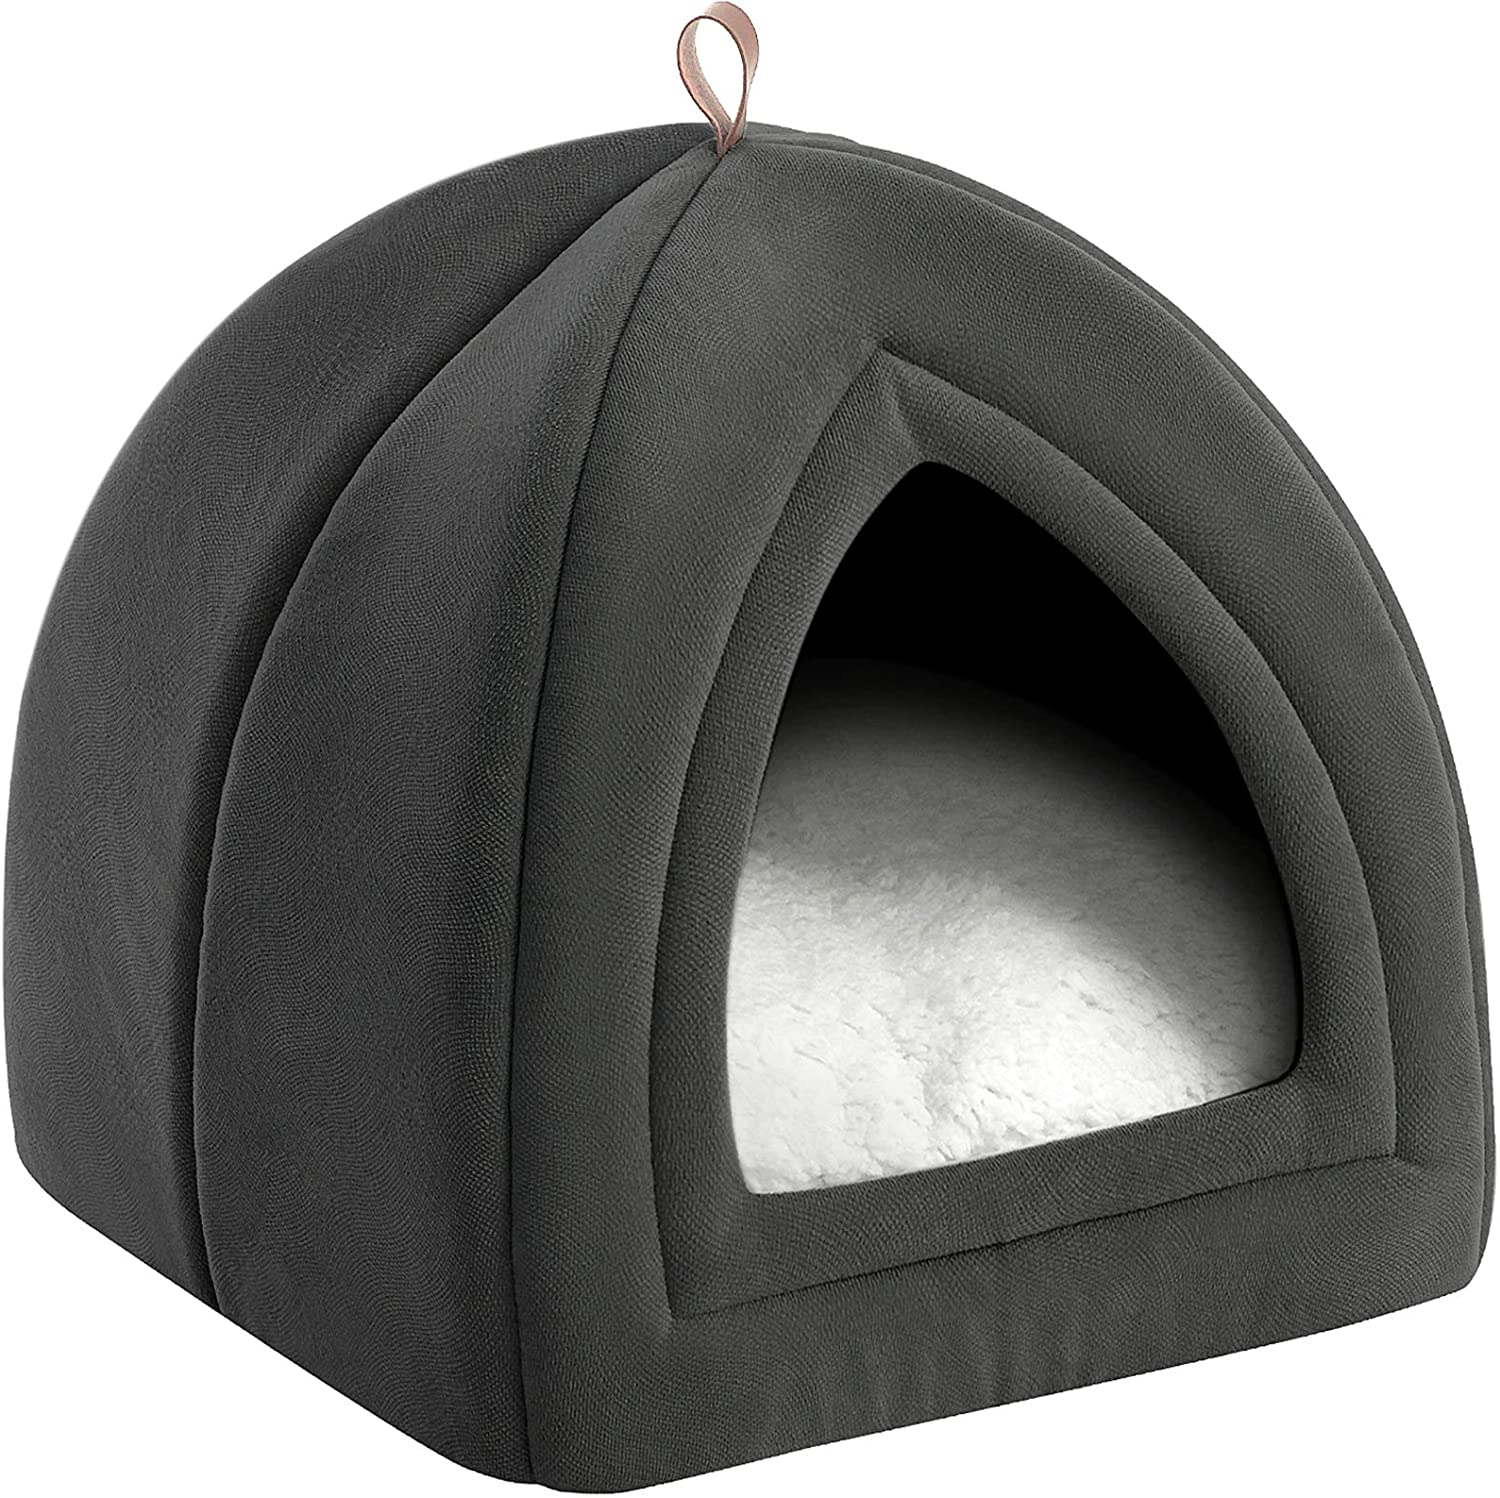 Microfiber Indoor Outdoor Pet Beds,Grey/Blue Bedsure Pet Tent Cave Bed for Cats/Small Dogs 15x15x15 inches 2-in-1 Cat Tent/Kitten Bed/Cat Hut with Removable Washable Cushioned Pillow 